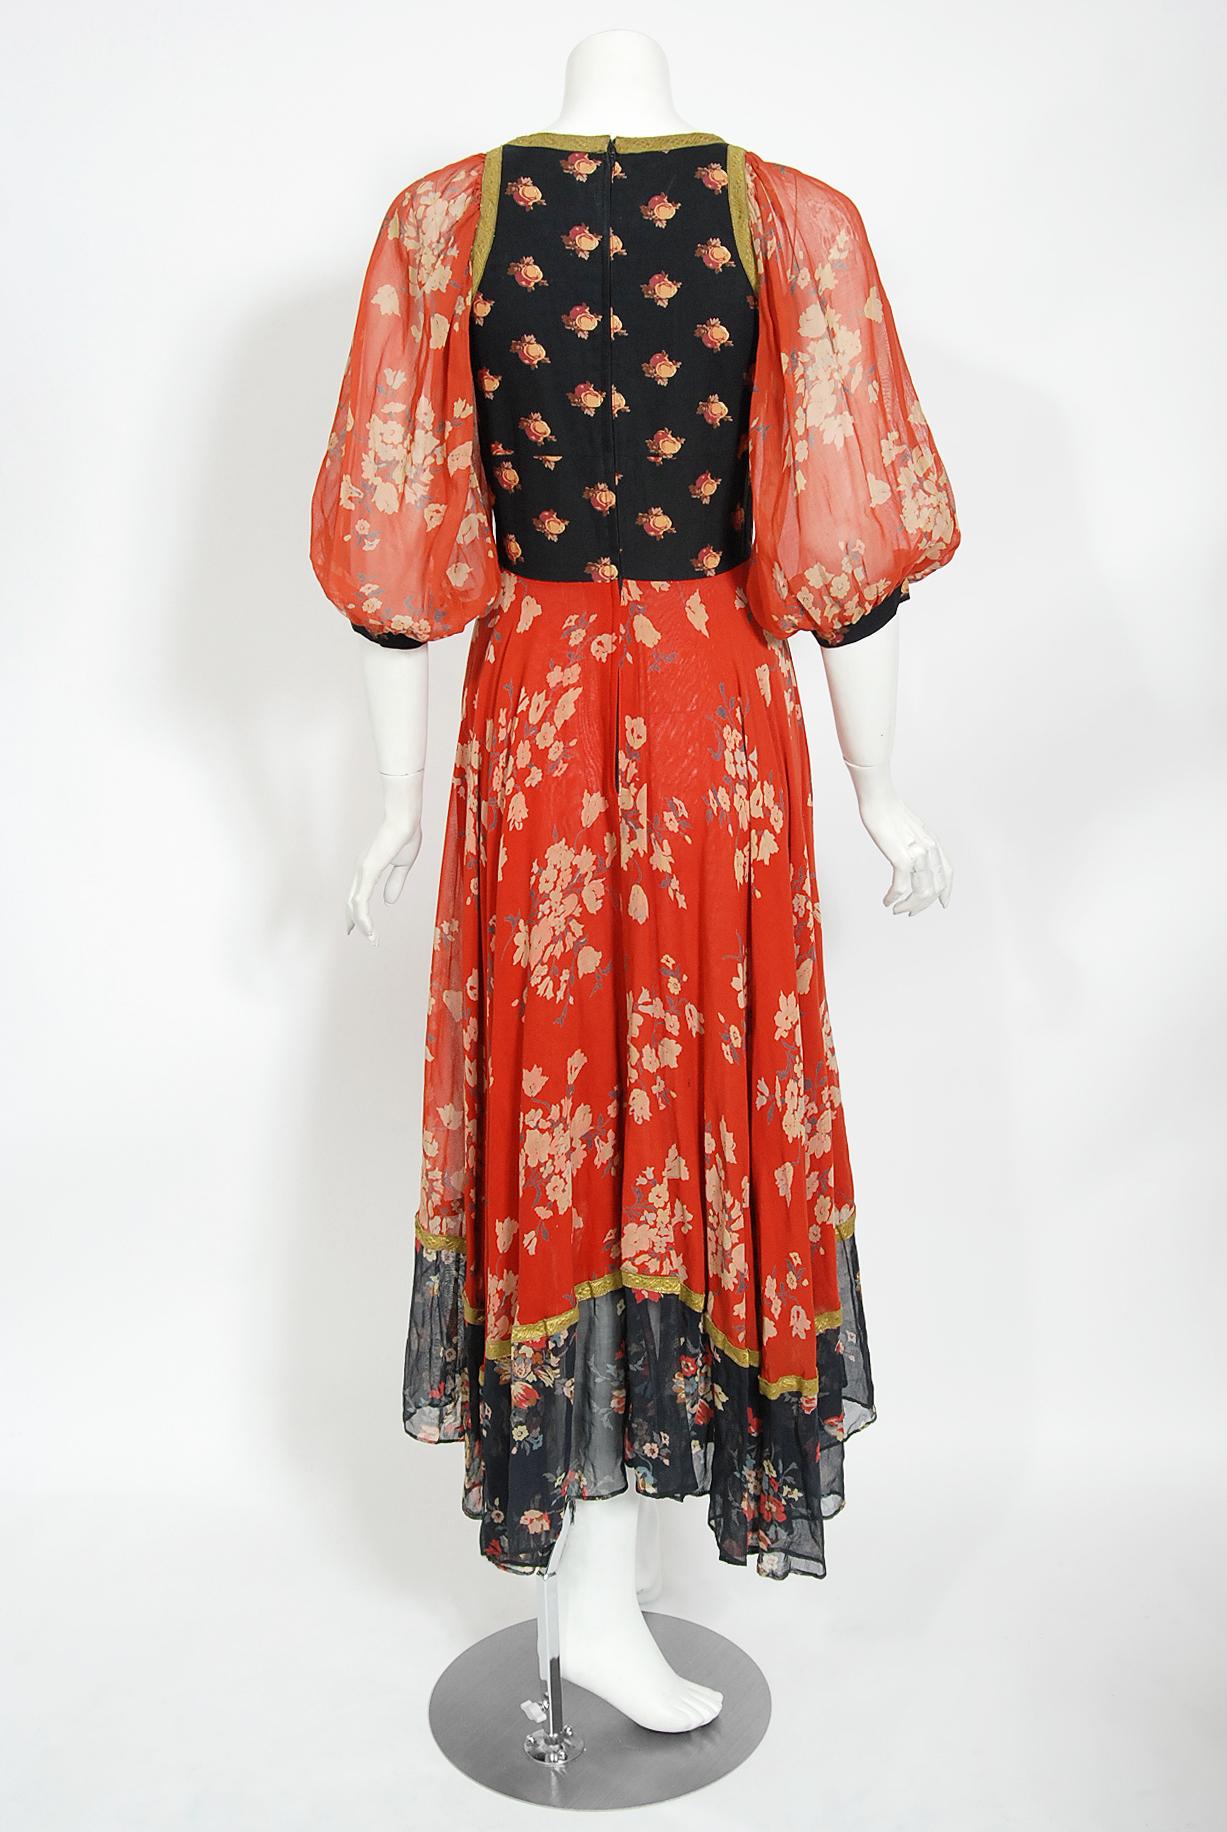 Vintage 1971 Thea Porter Documented Black & Red Floral Print Cotton Gypsy Dress  9